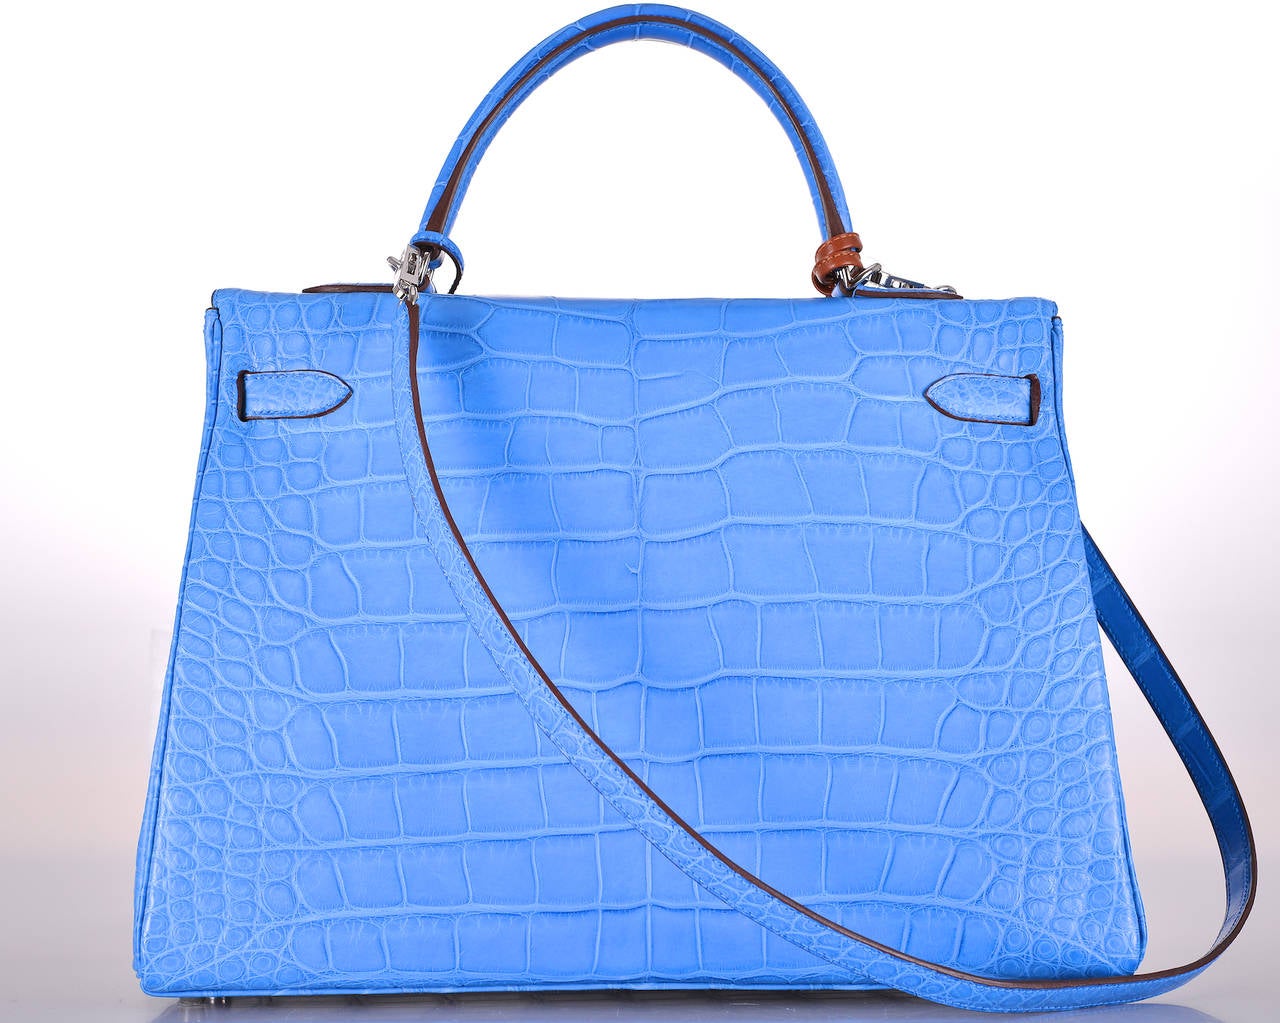 HERMES KELLY 35CM MYKONOS MATTE ALLIGATOR

As always, another one of my fab finds! Hermes Kelly 35cm. The color is STUNNING MYKONOS. Perfection as always, with palladium hardware.
THIS BEAUTY IS BRAND NEW! JUST PURCHASED!

THERE IS NEVER A